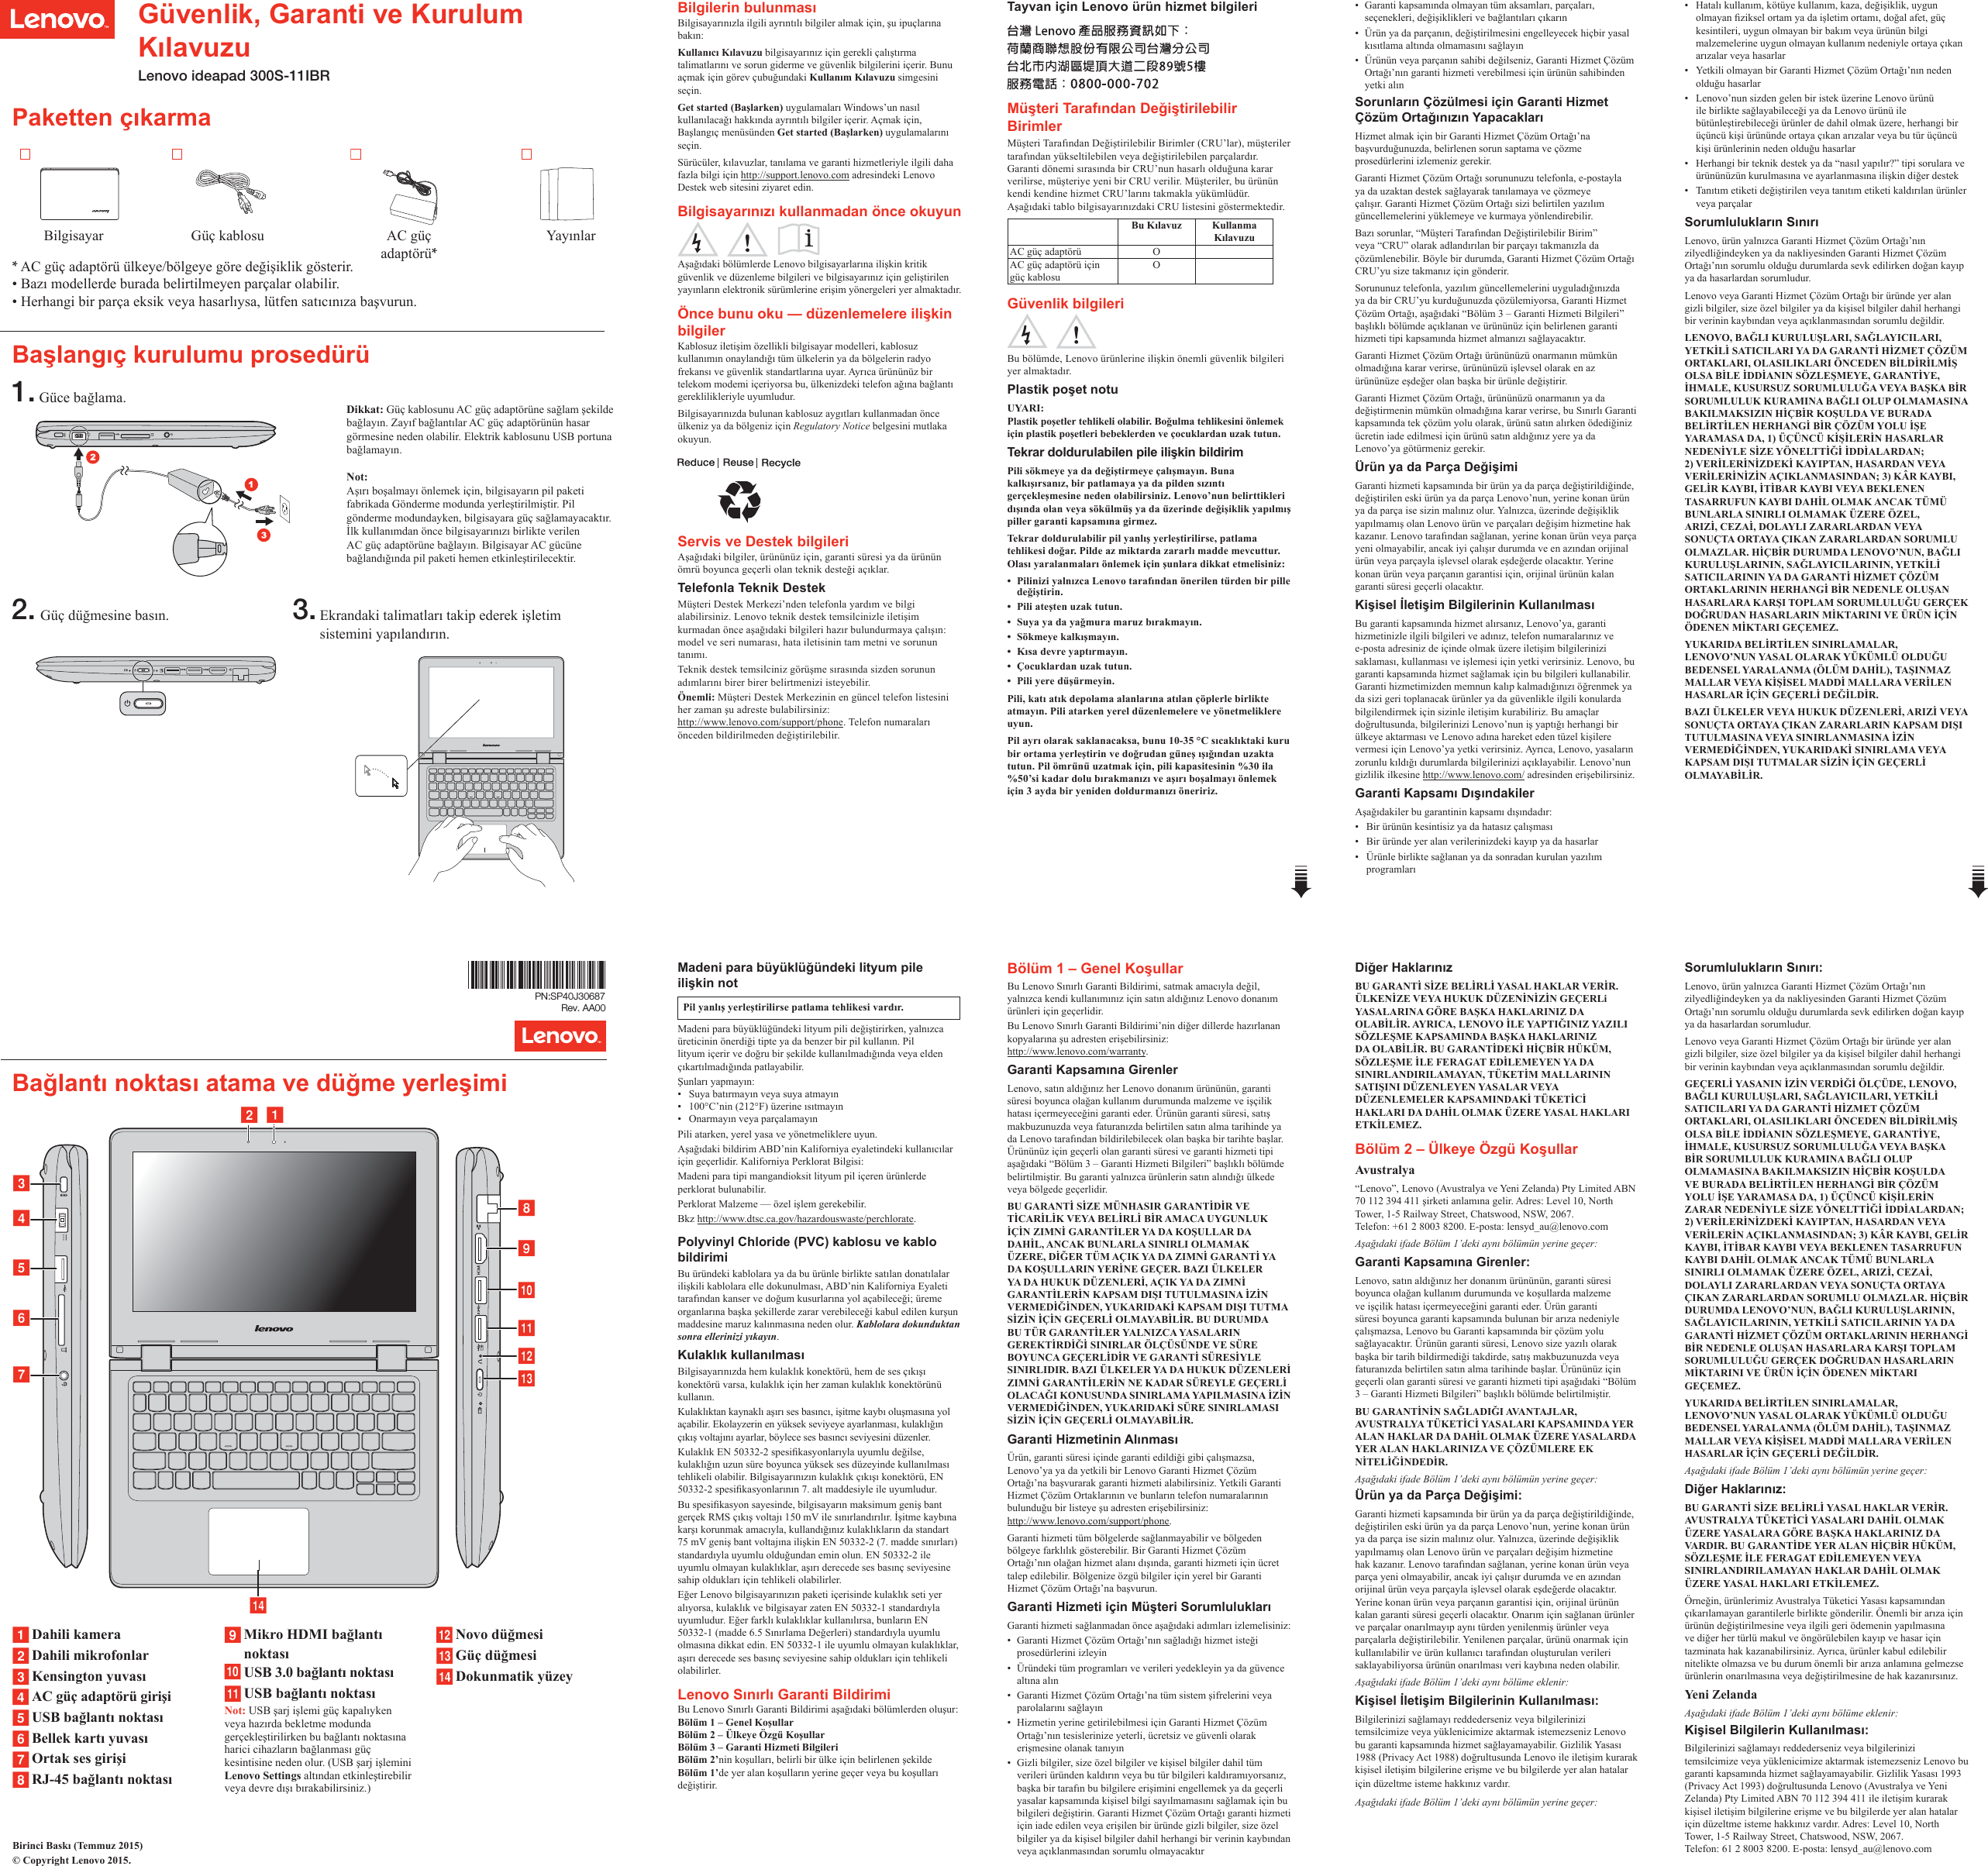 Page 1 of 2 - Lenovo Ideapad 300S-11Ibr Swsg Tr 201608 User Manual (Turkish) Safety, Warranty, And Setup Guide - Laptop (ideapad) Type 80KU